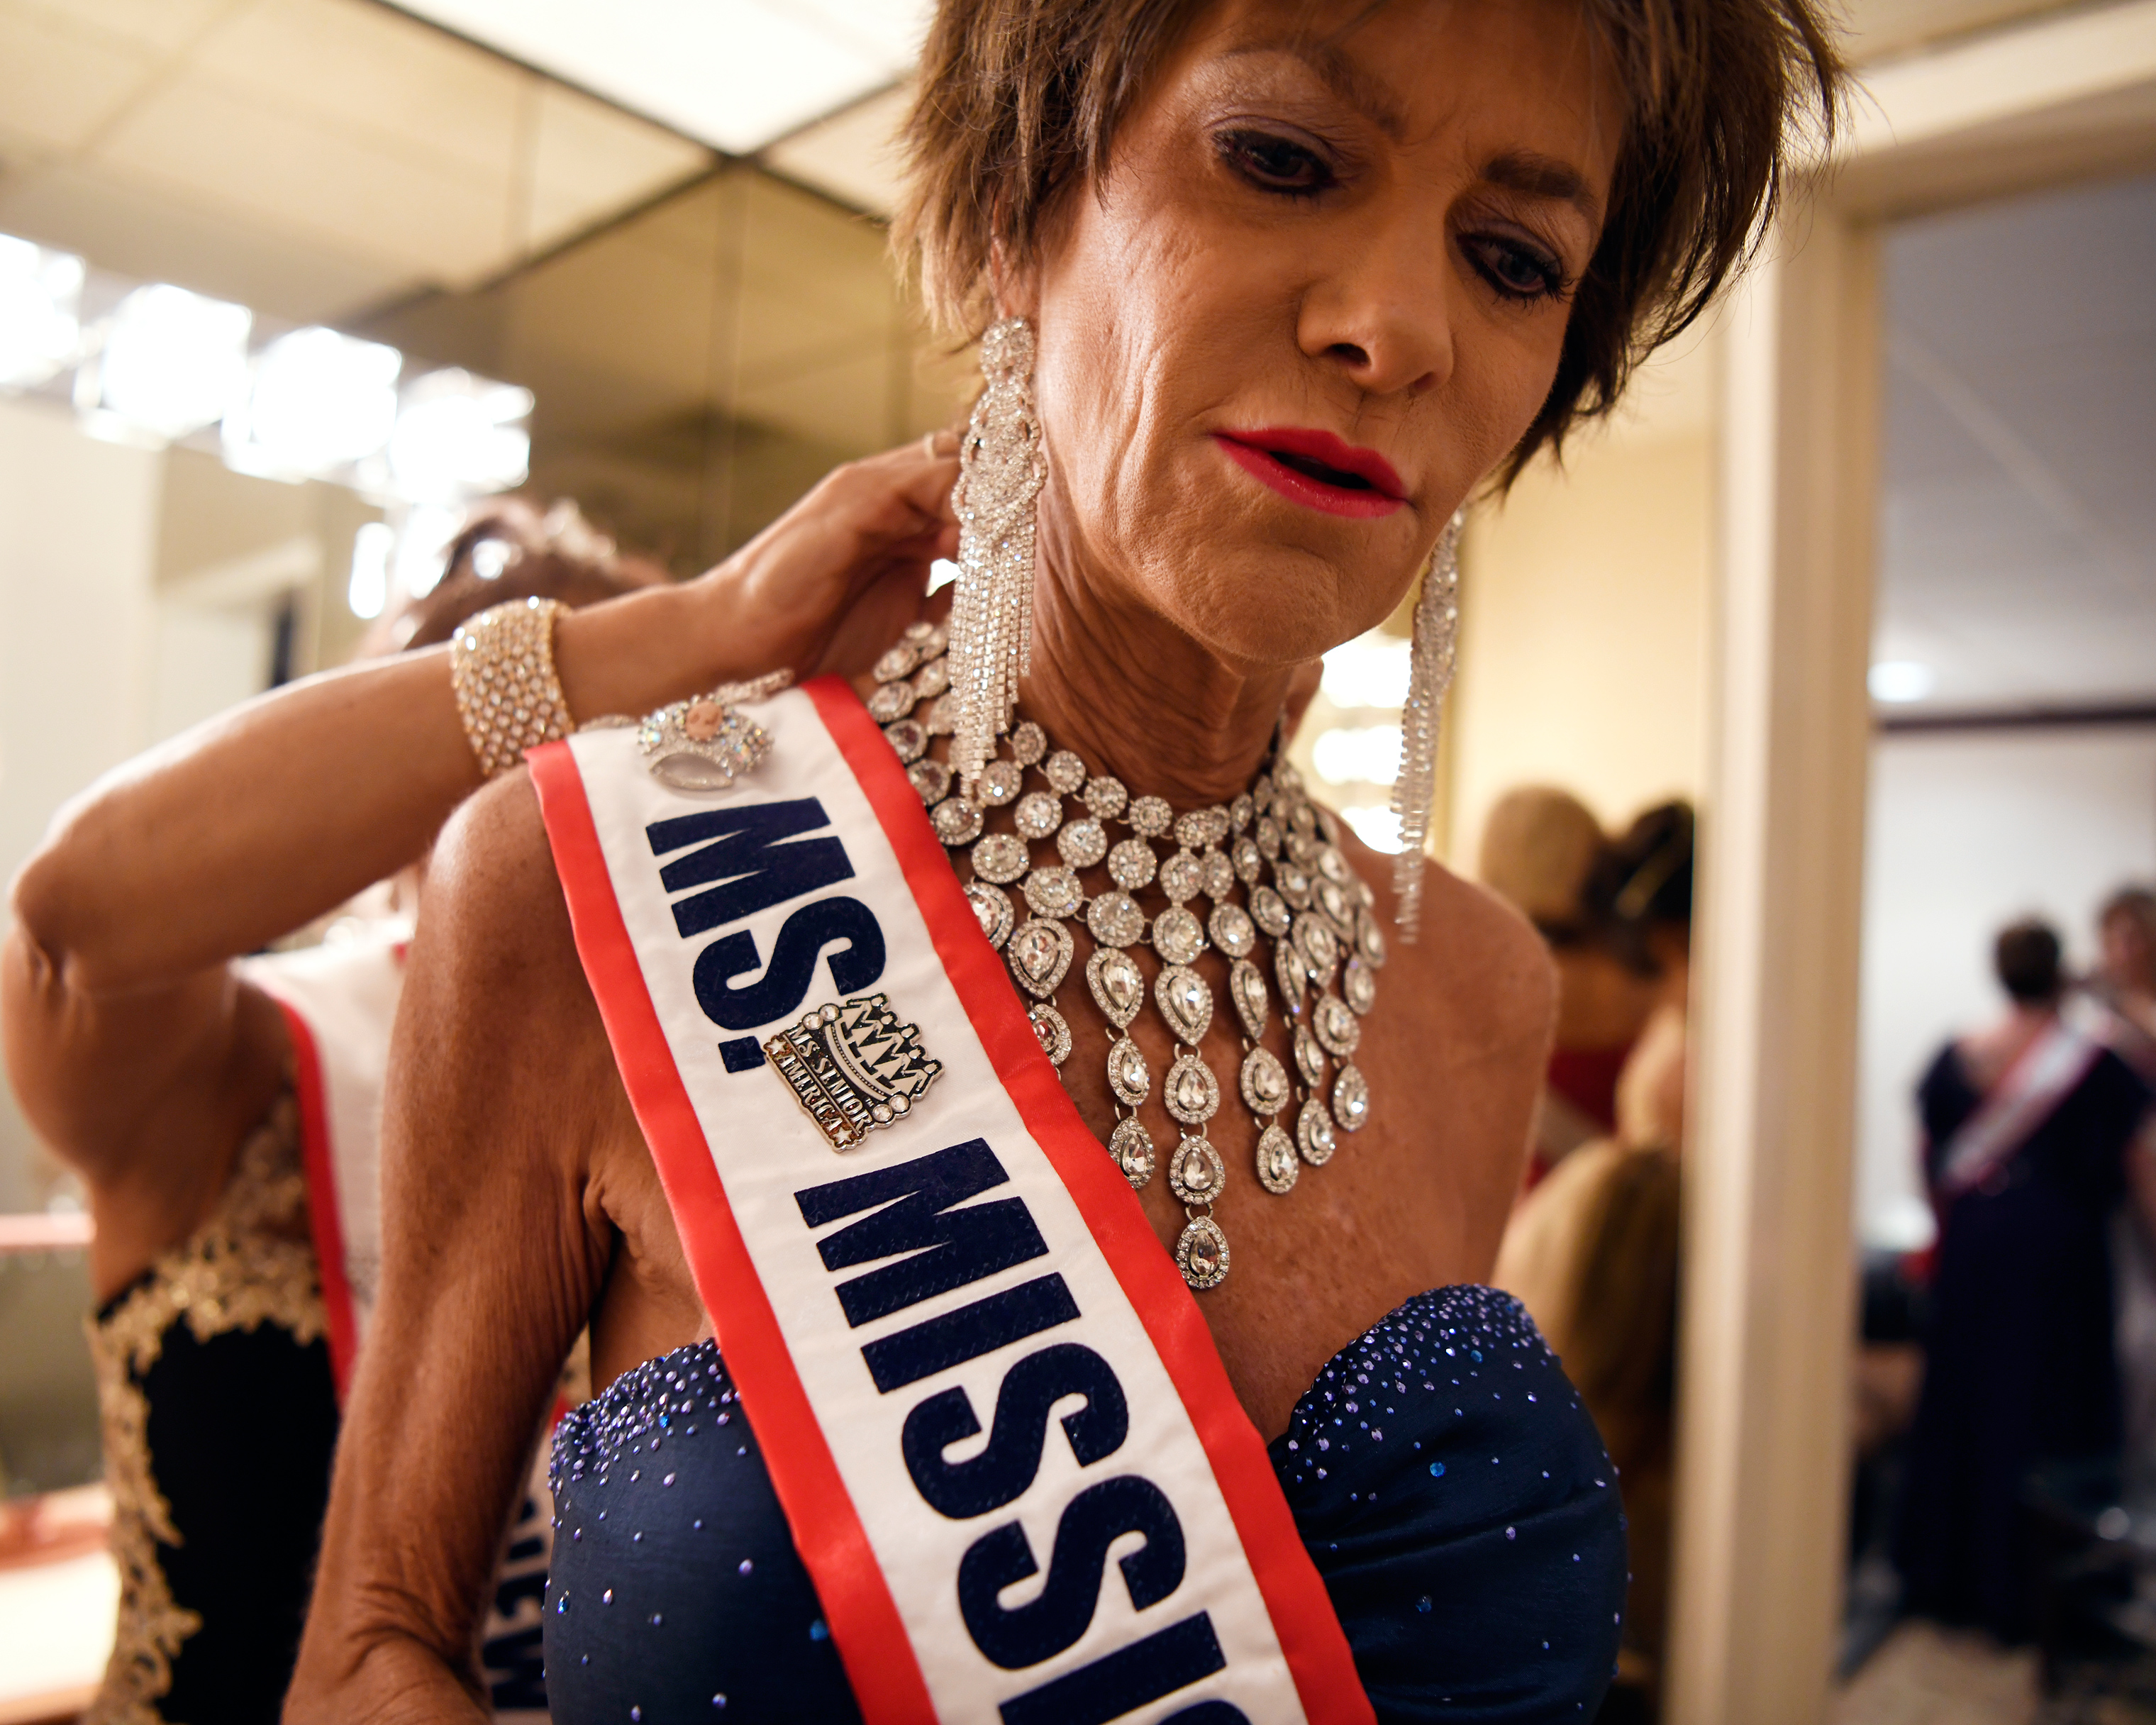 Mary Jane Lawler, Ms. Mississippi, gets ready before the Ms. Senior America Pageant finale. (Rosa Polin for TIME)